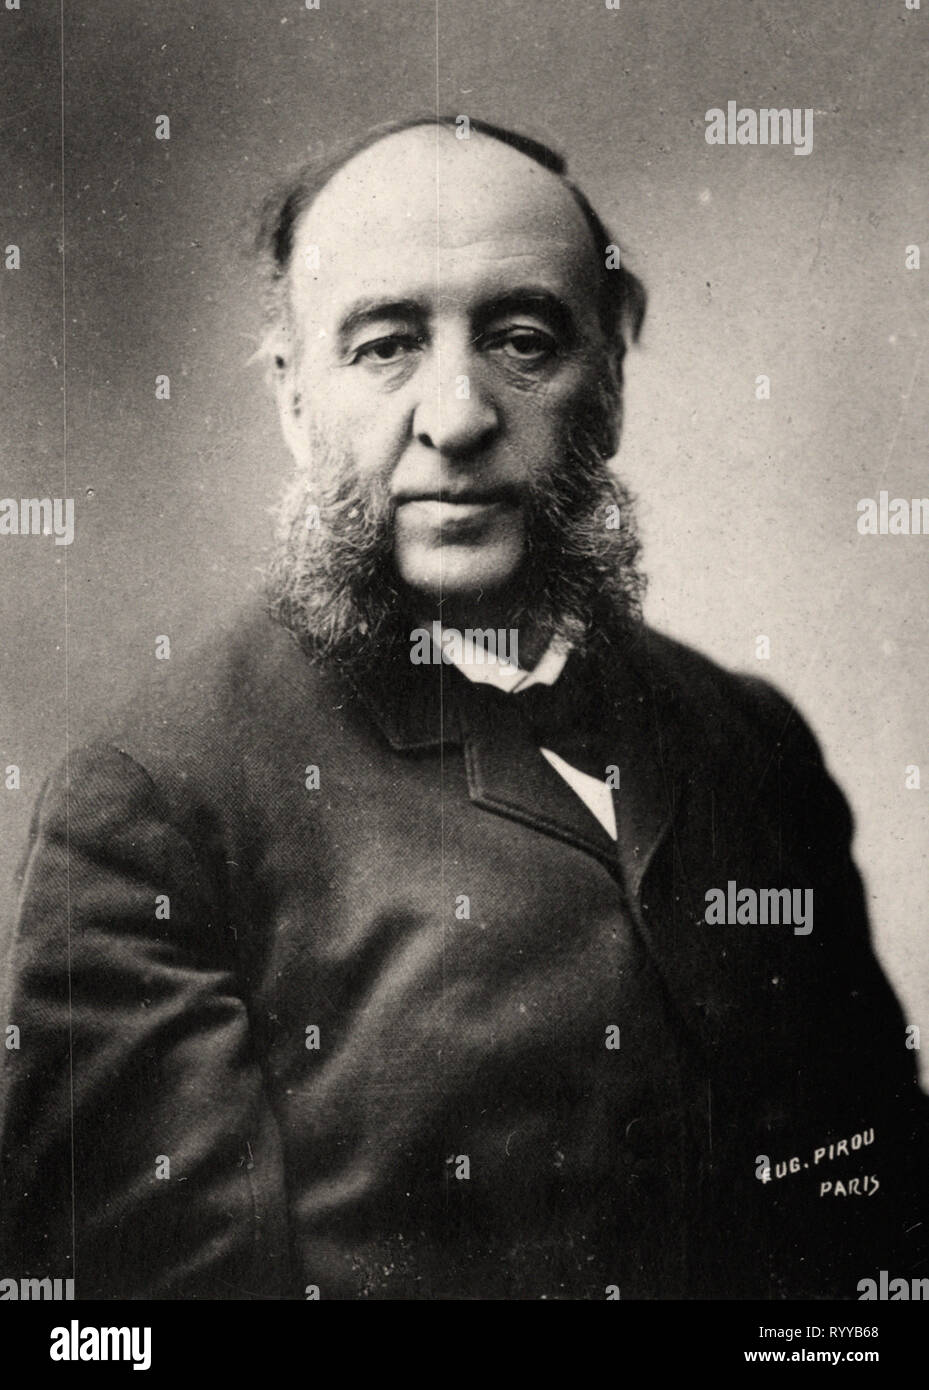 Photographic Portrait Of Ferry   From Collection Félix Potin, Early 20th Century Stock Photo